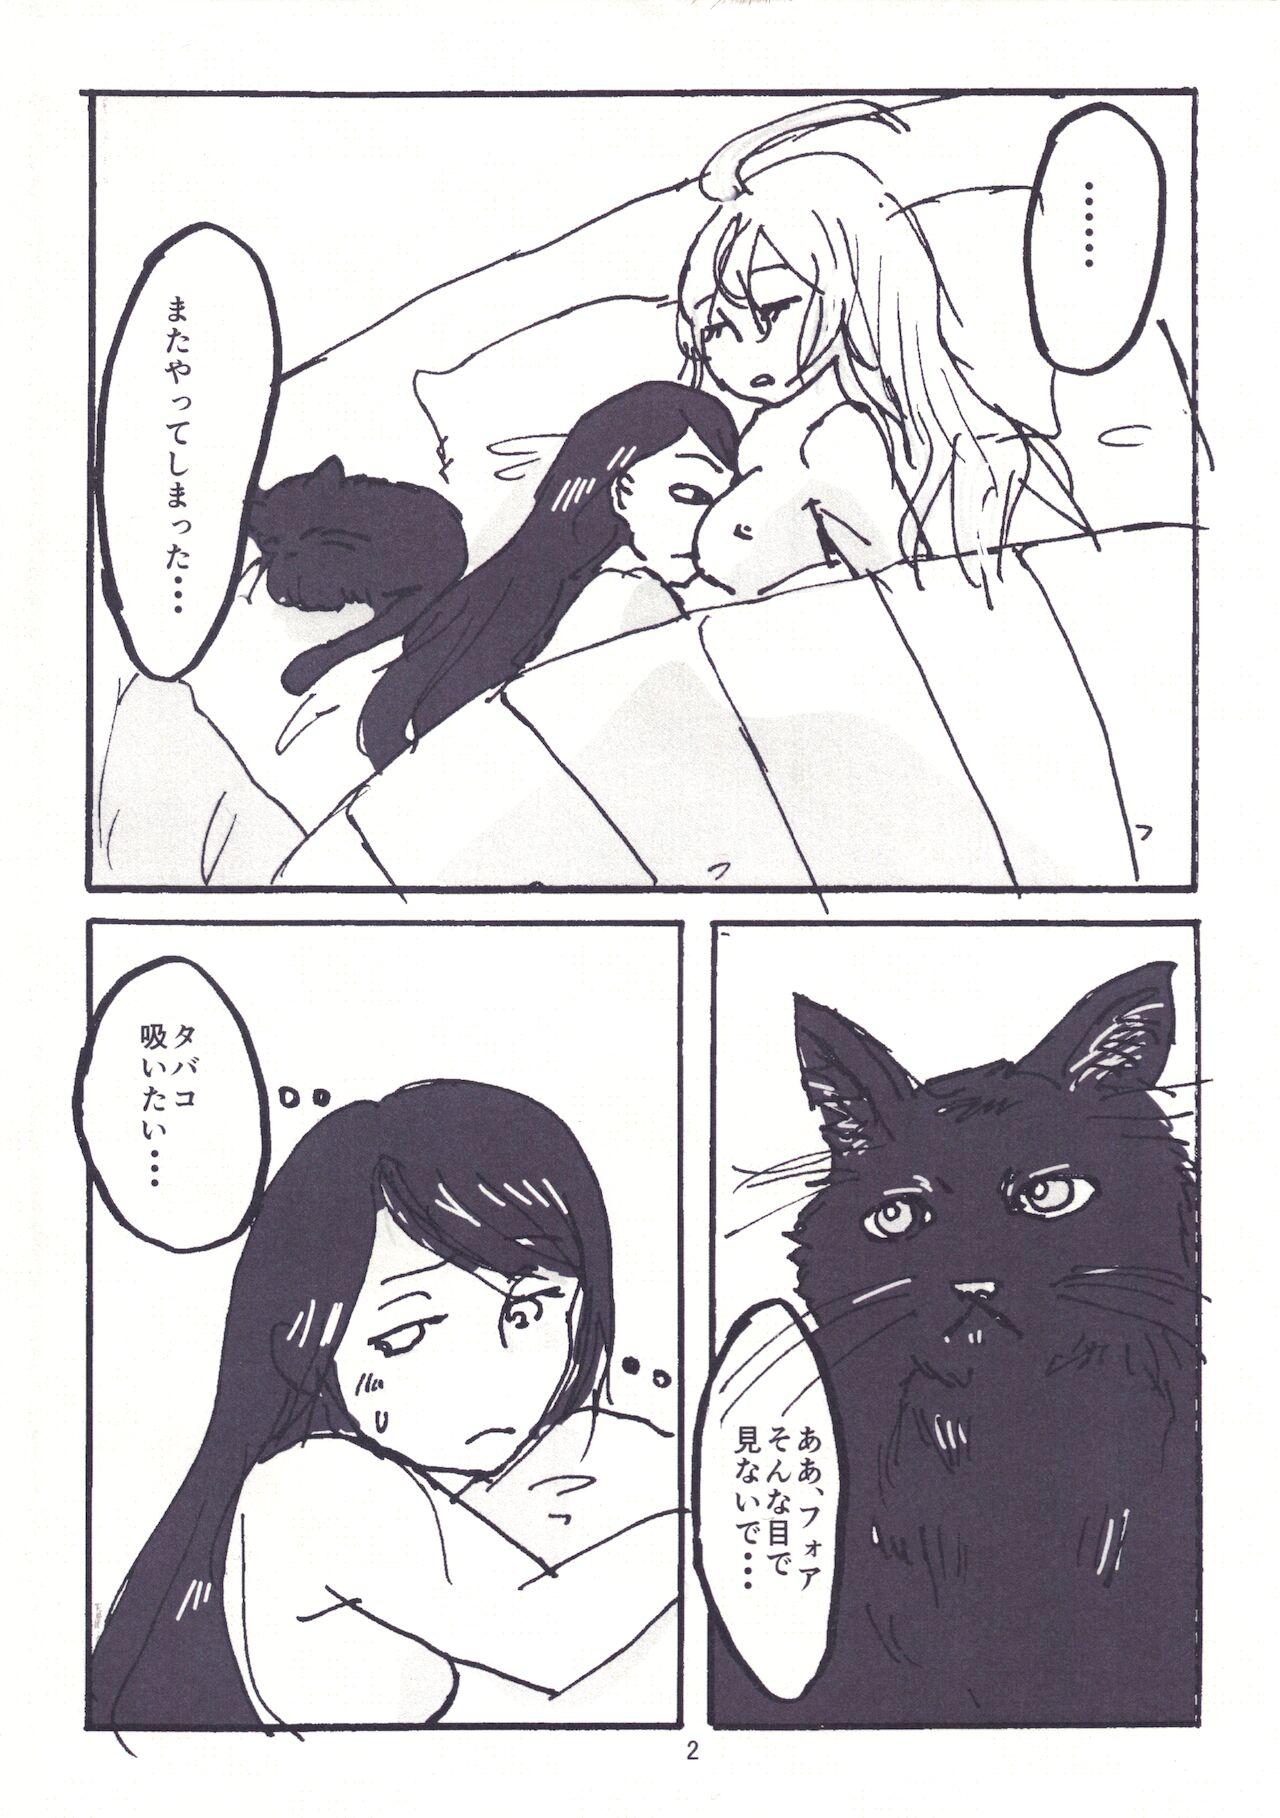 Camgirl NOT SO BAD - Va 11 hall a Pussy Play - Page 4